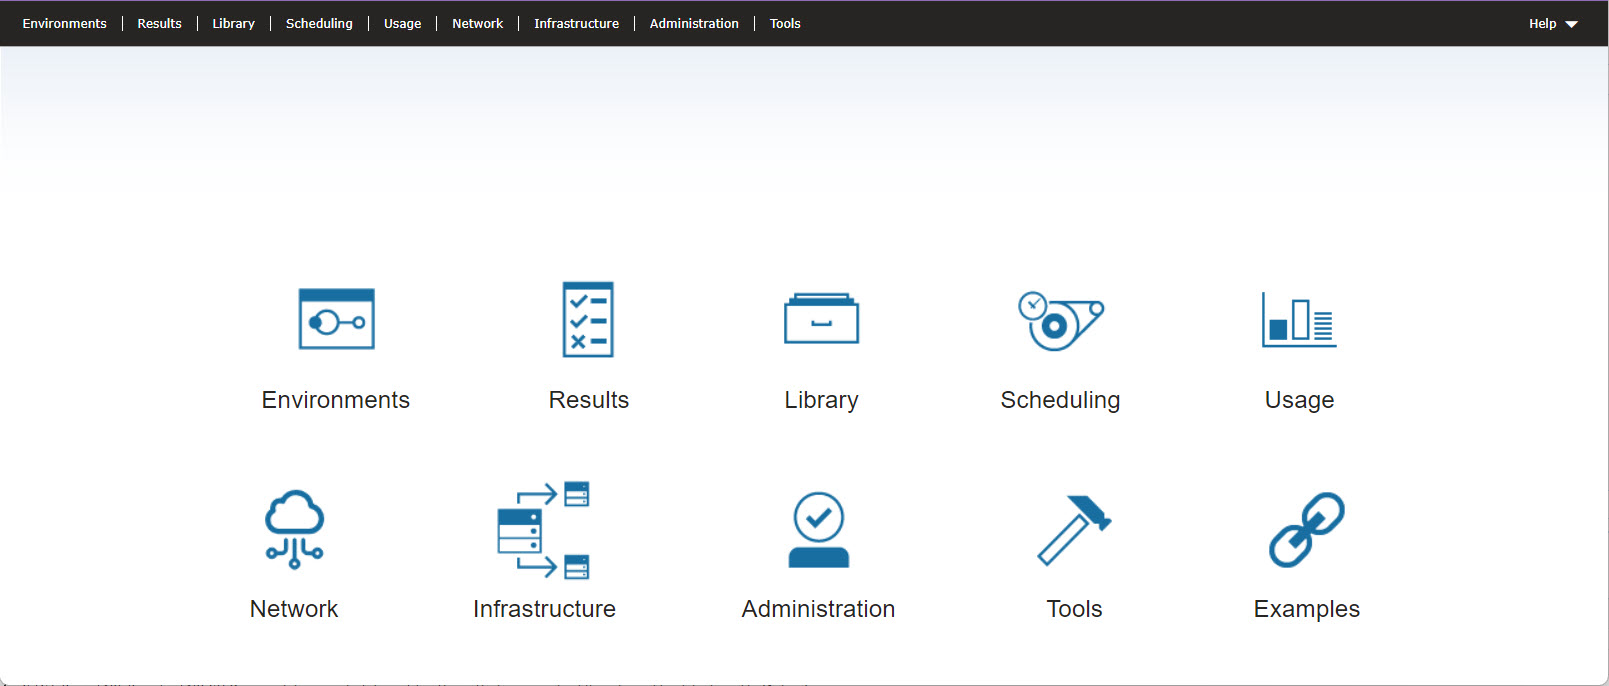 Image of the Test Virtualization Control Panel Home page.